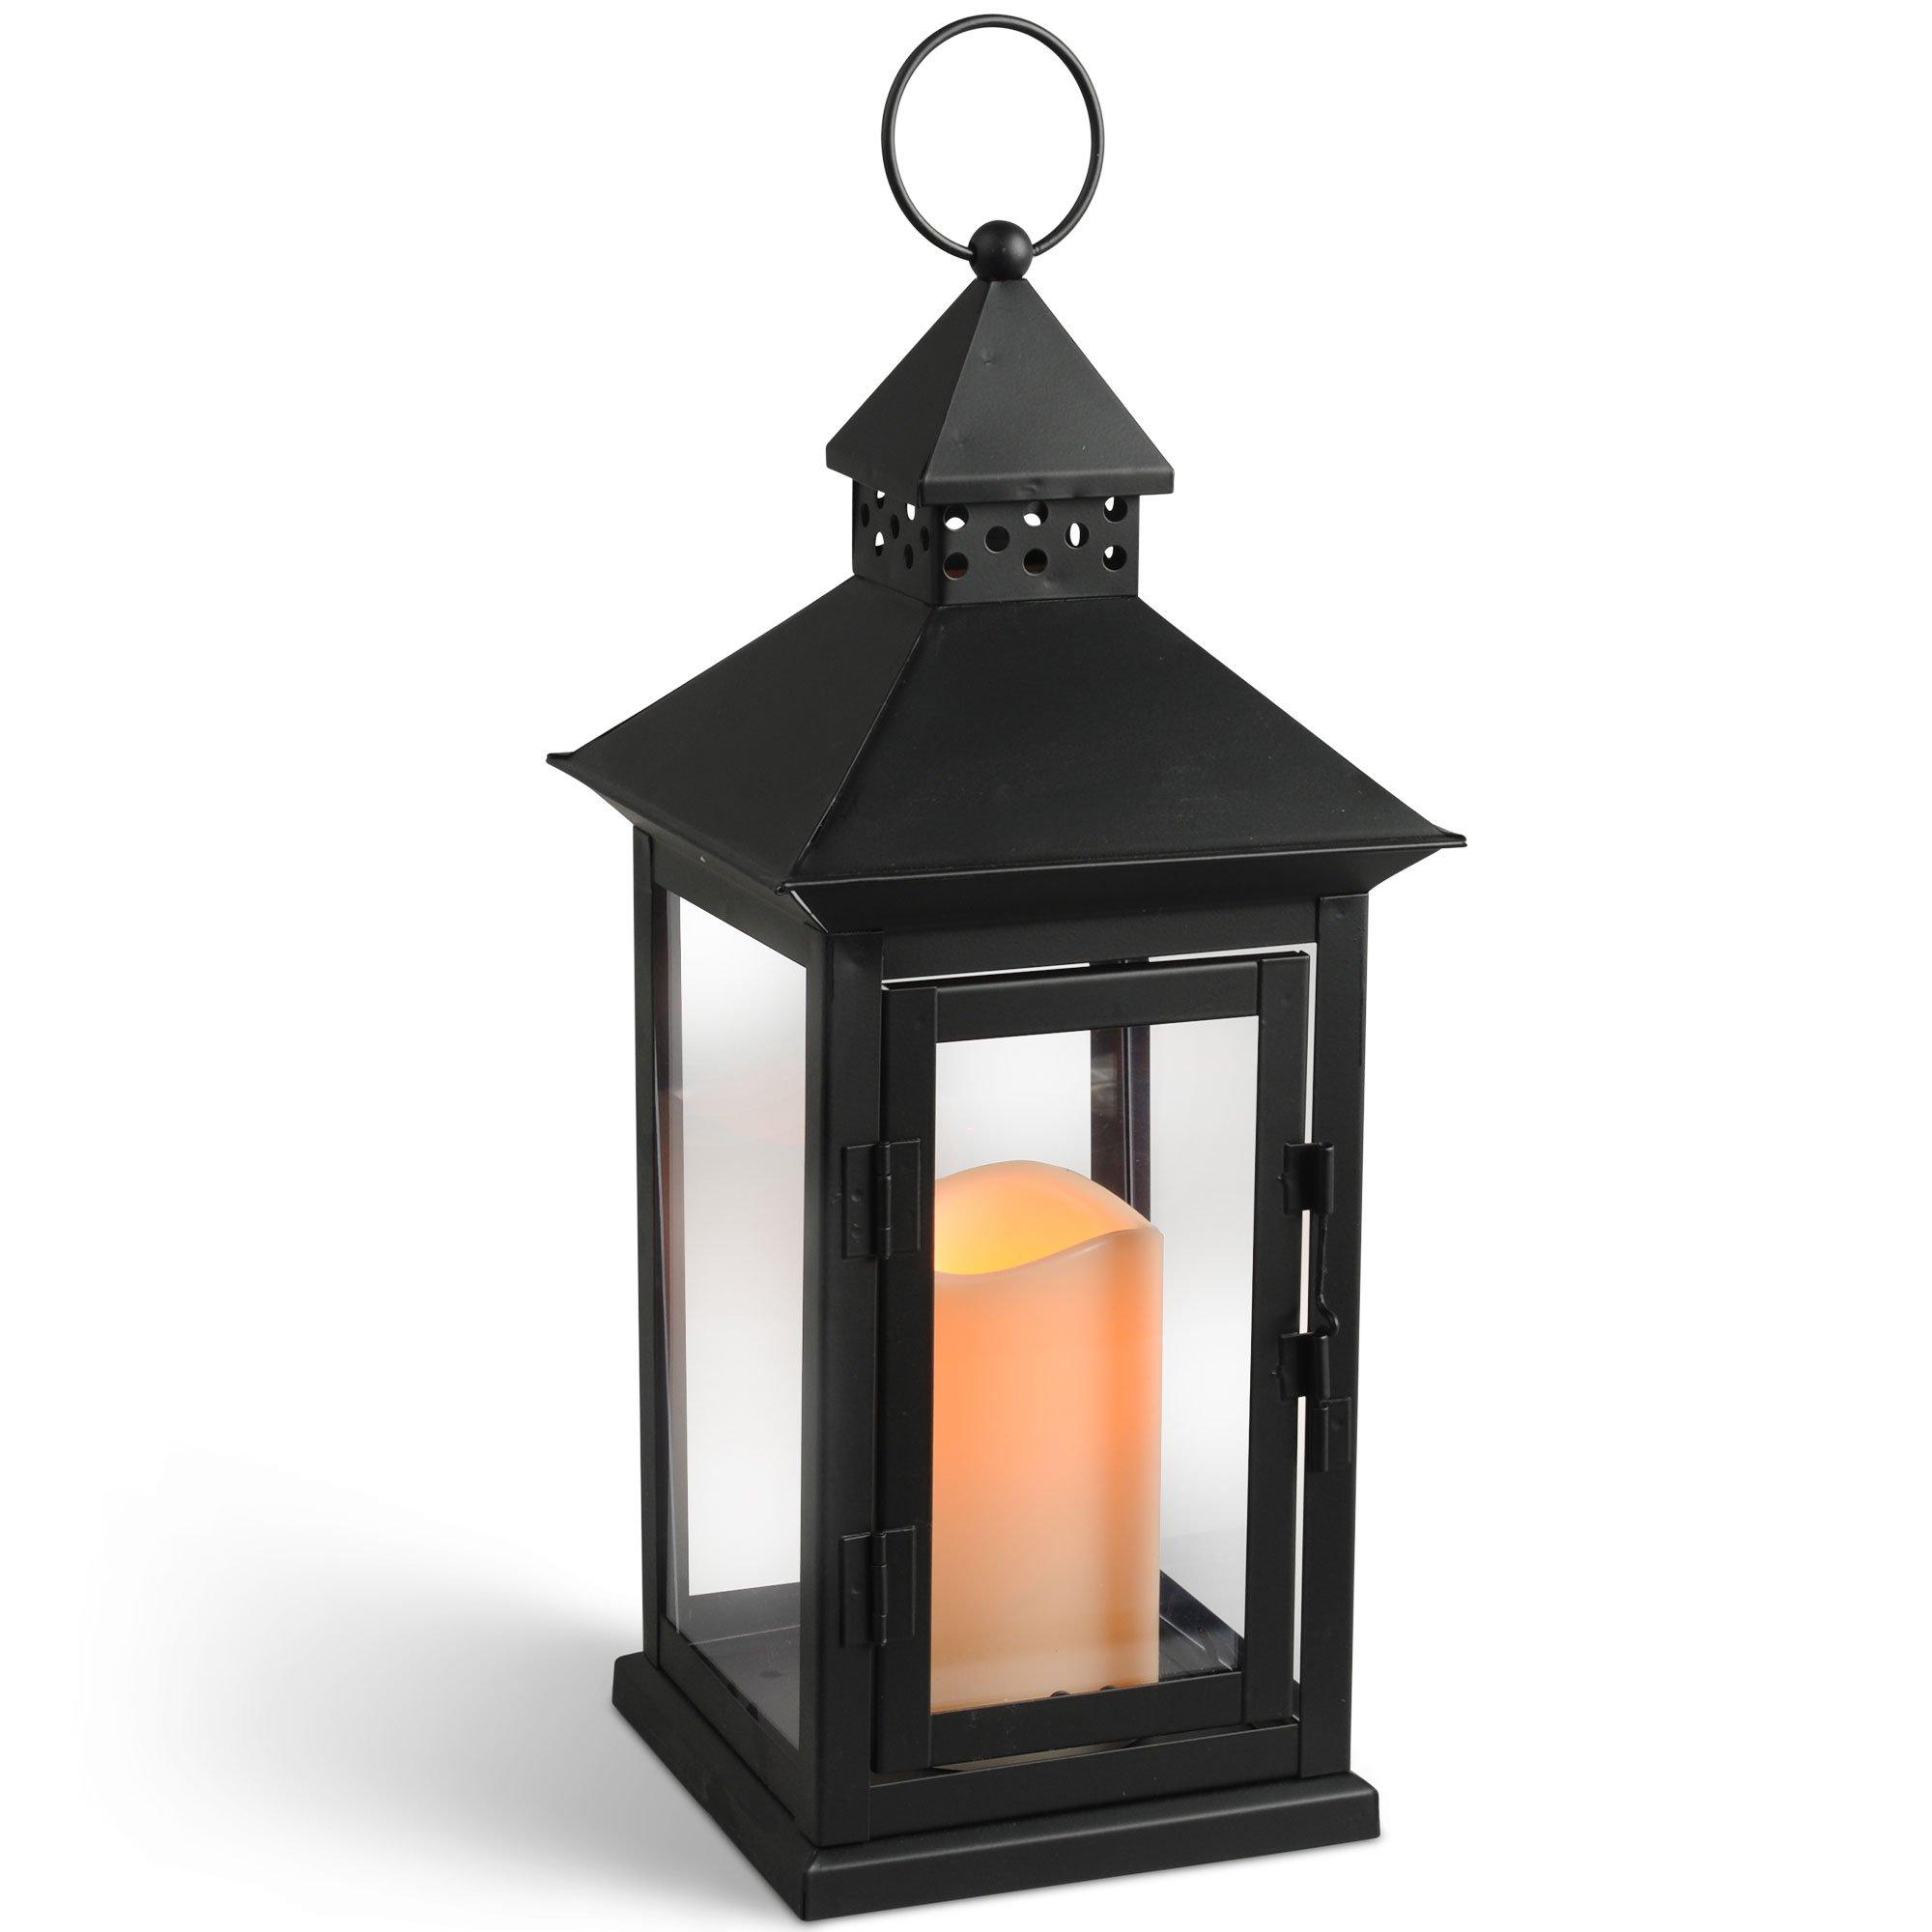 Classic Black Metal LED Candle Lantern, 6in x 15in